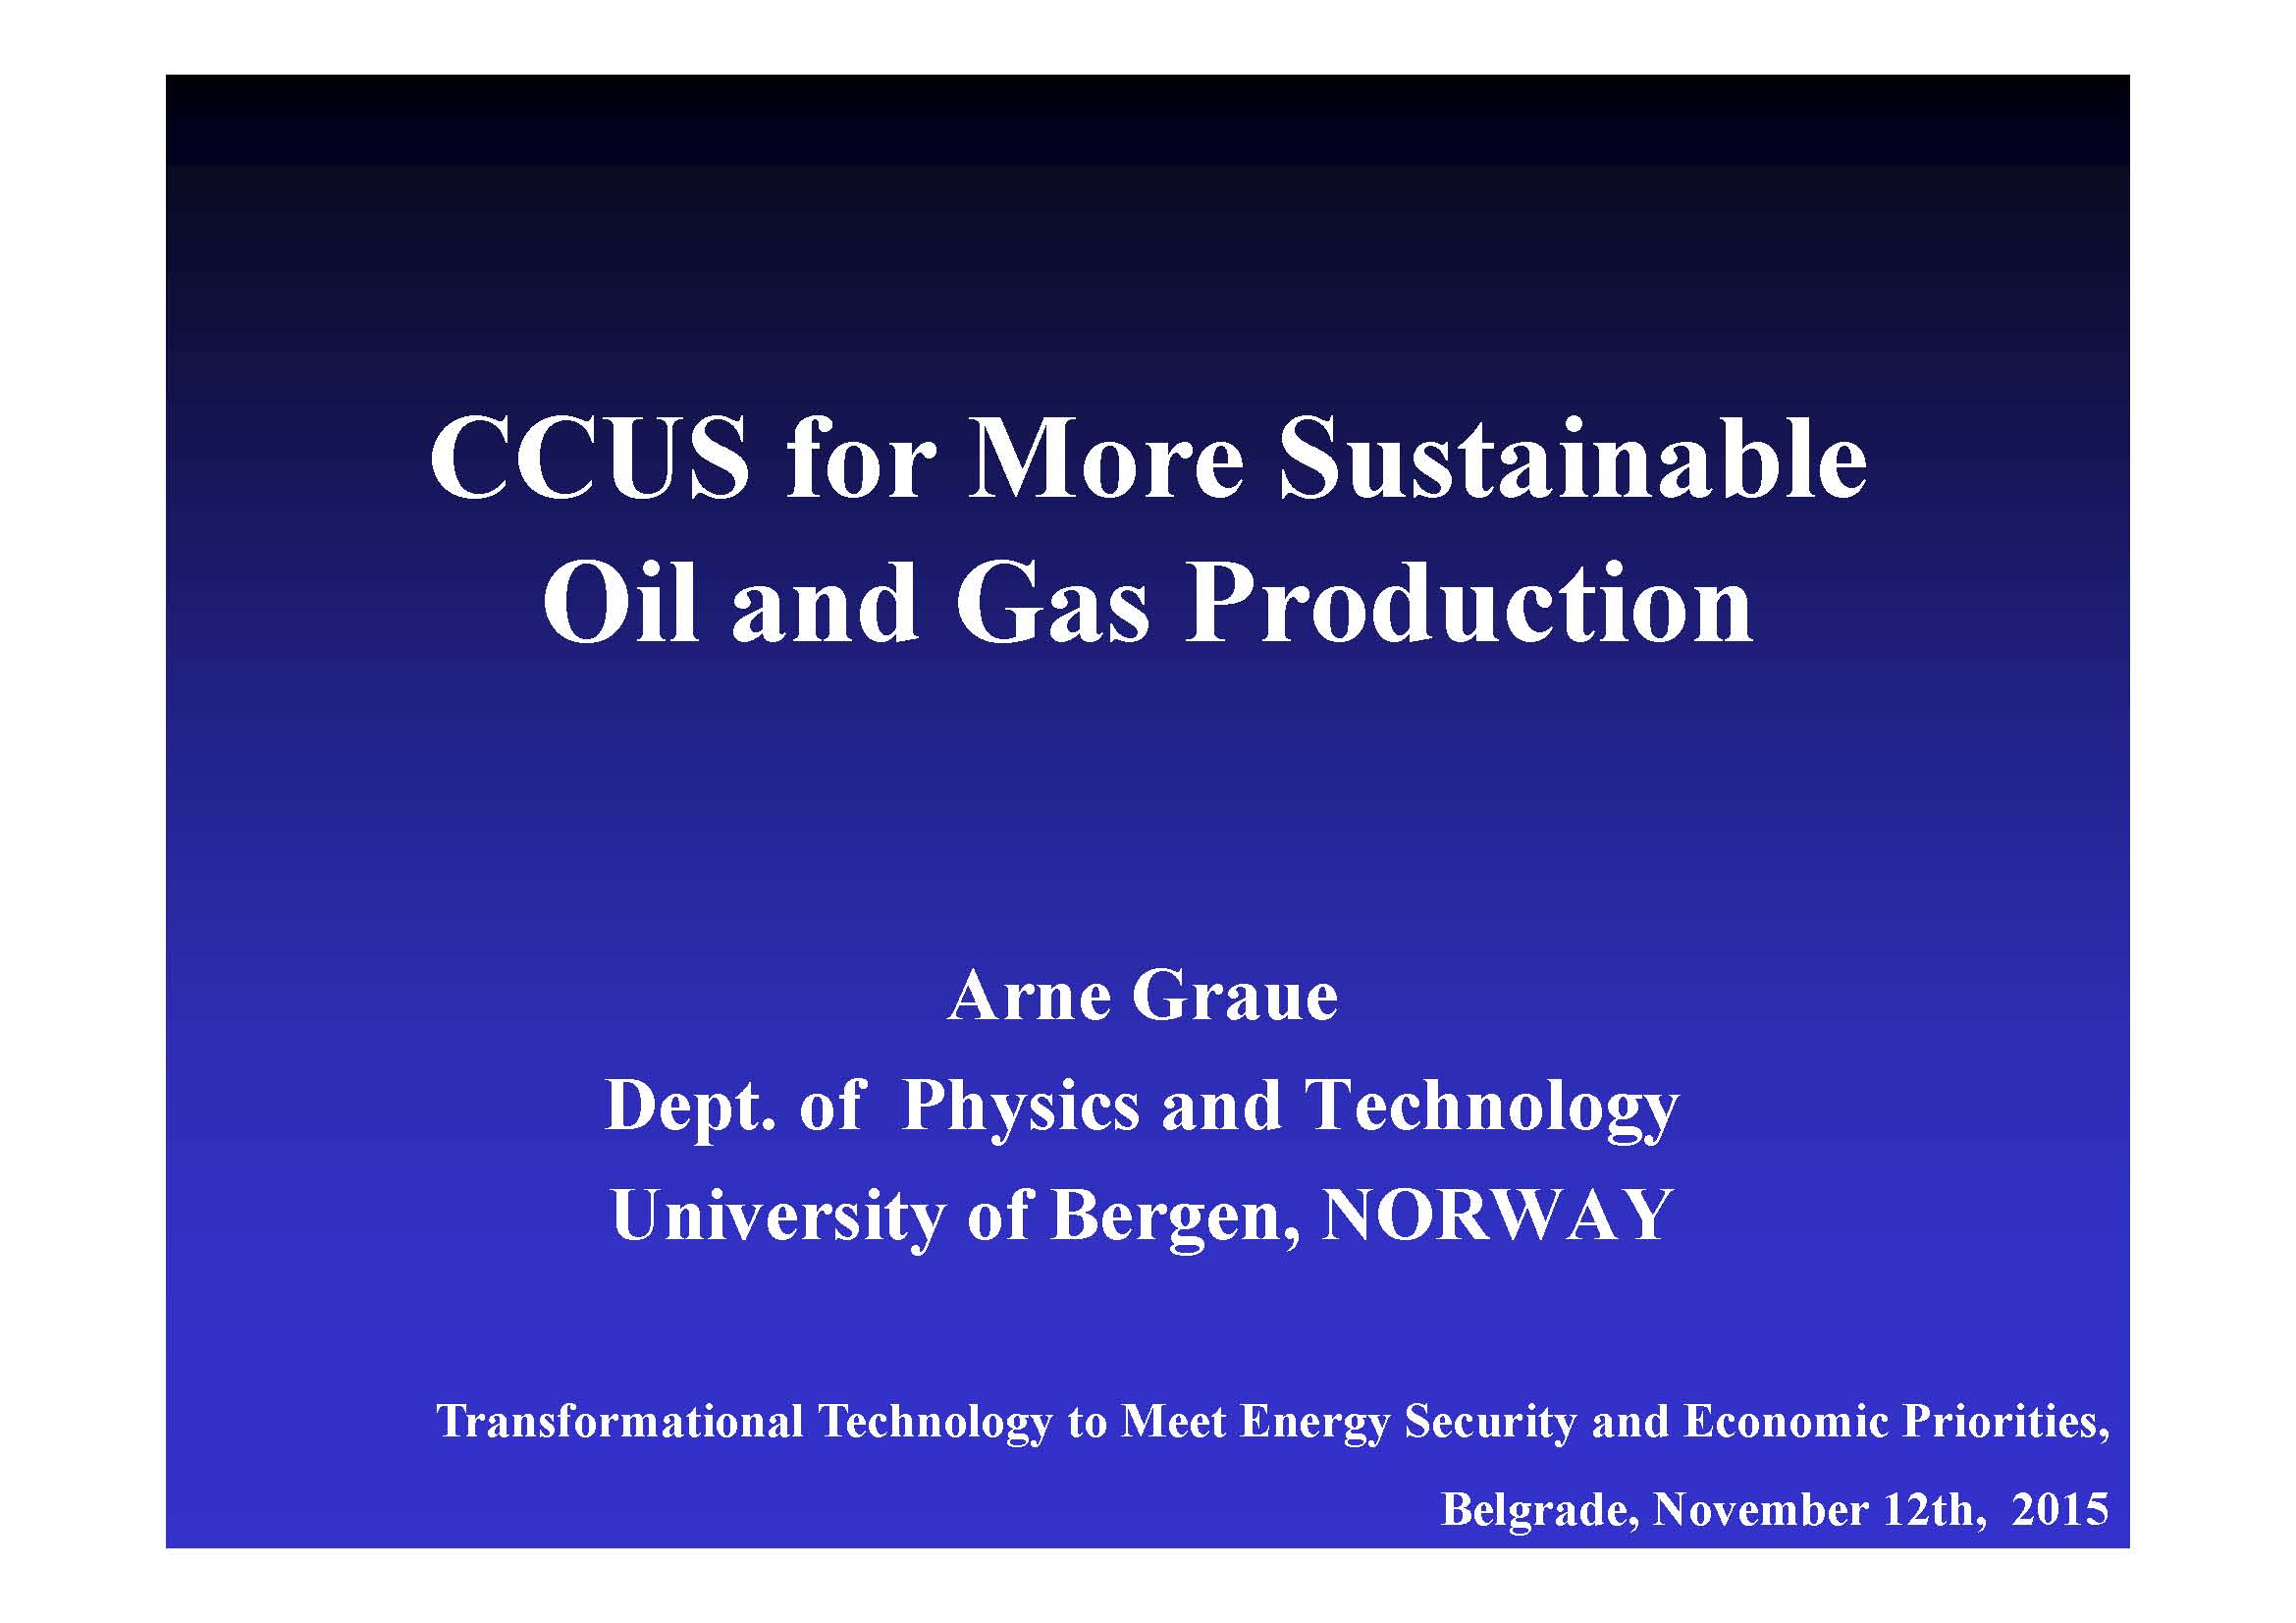 image_arne-graue_ccus-more-sustainable-oil-gas-production_Page_01.jpg